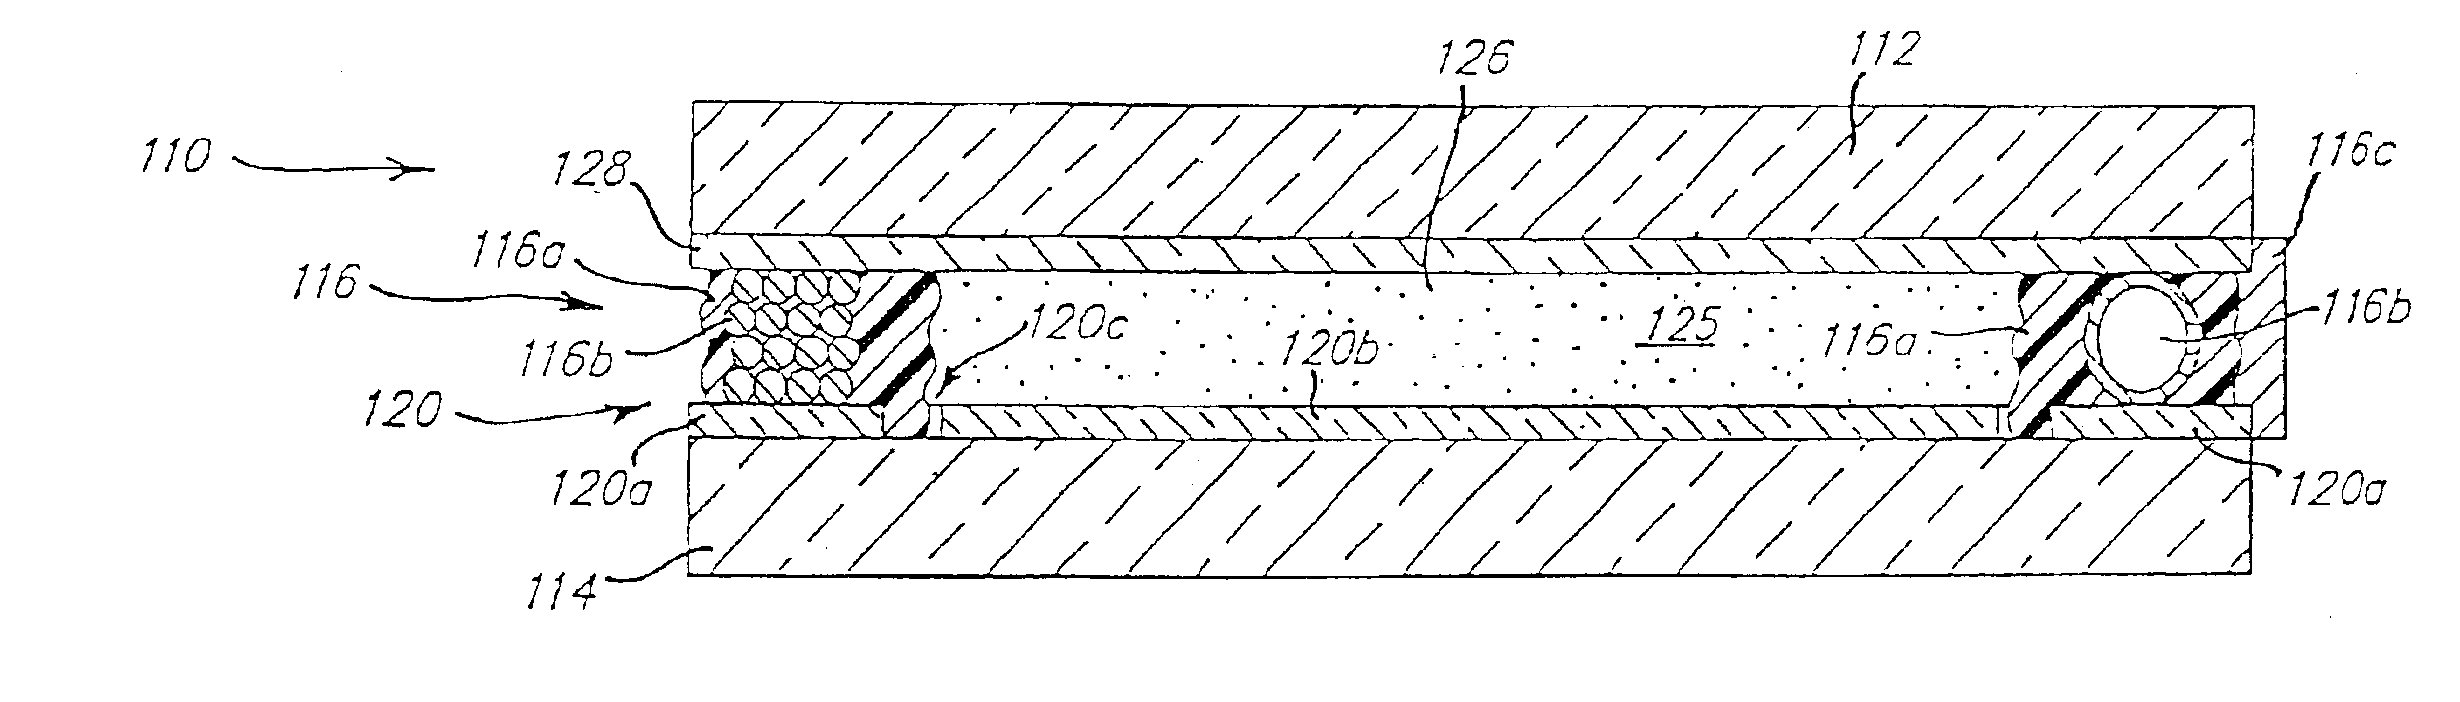 Electrochromic rearview mirror element incorporating a third surface reflector